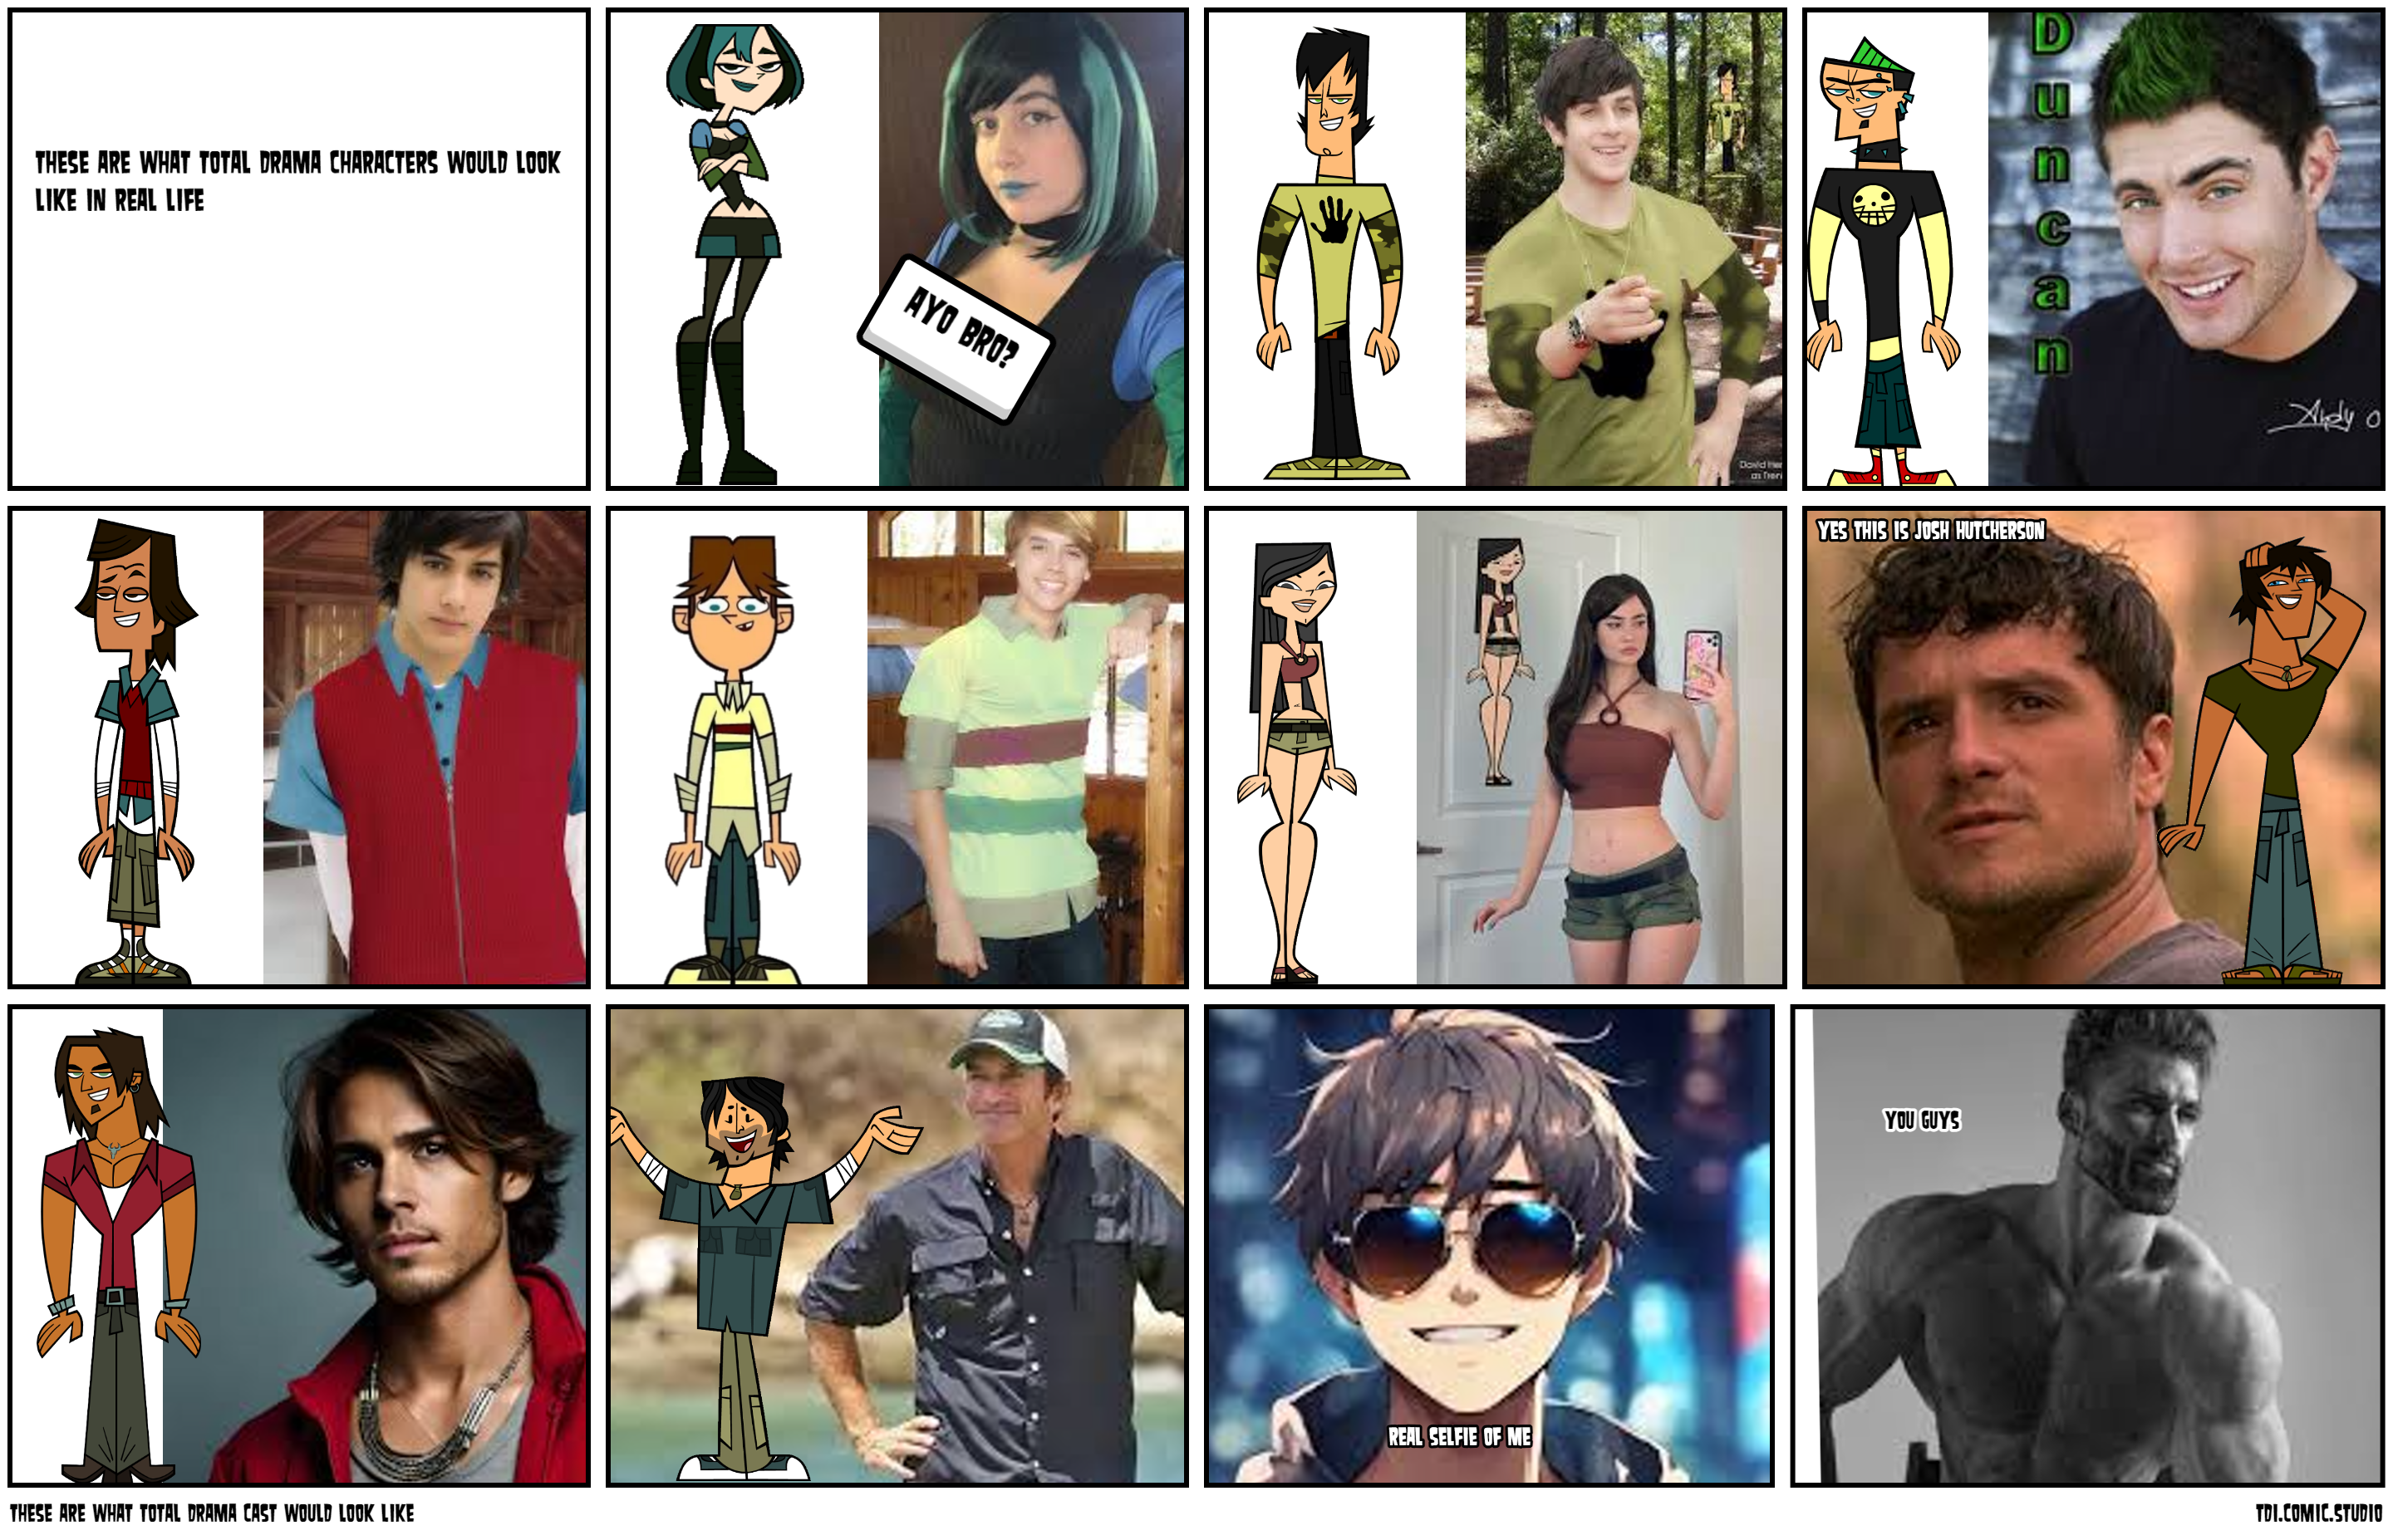 These are what total drama cast would look like 